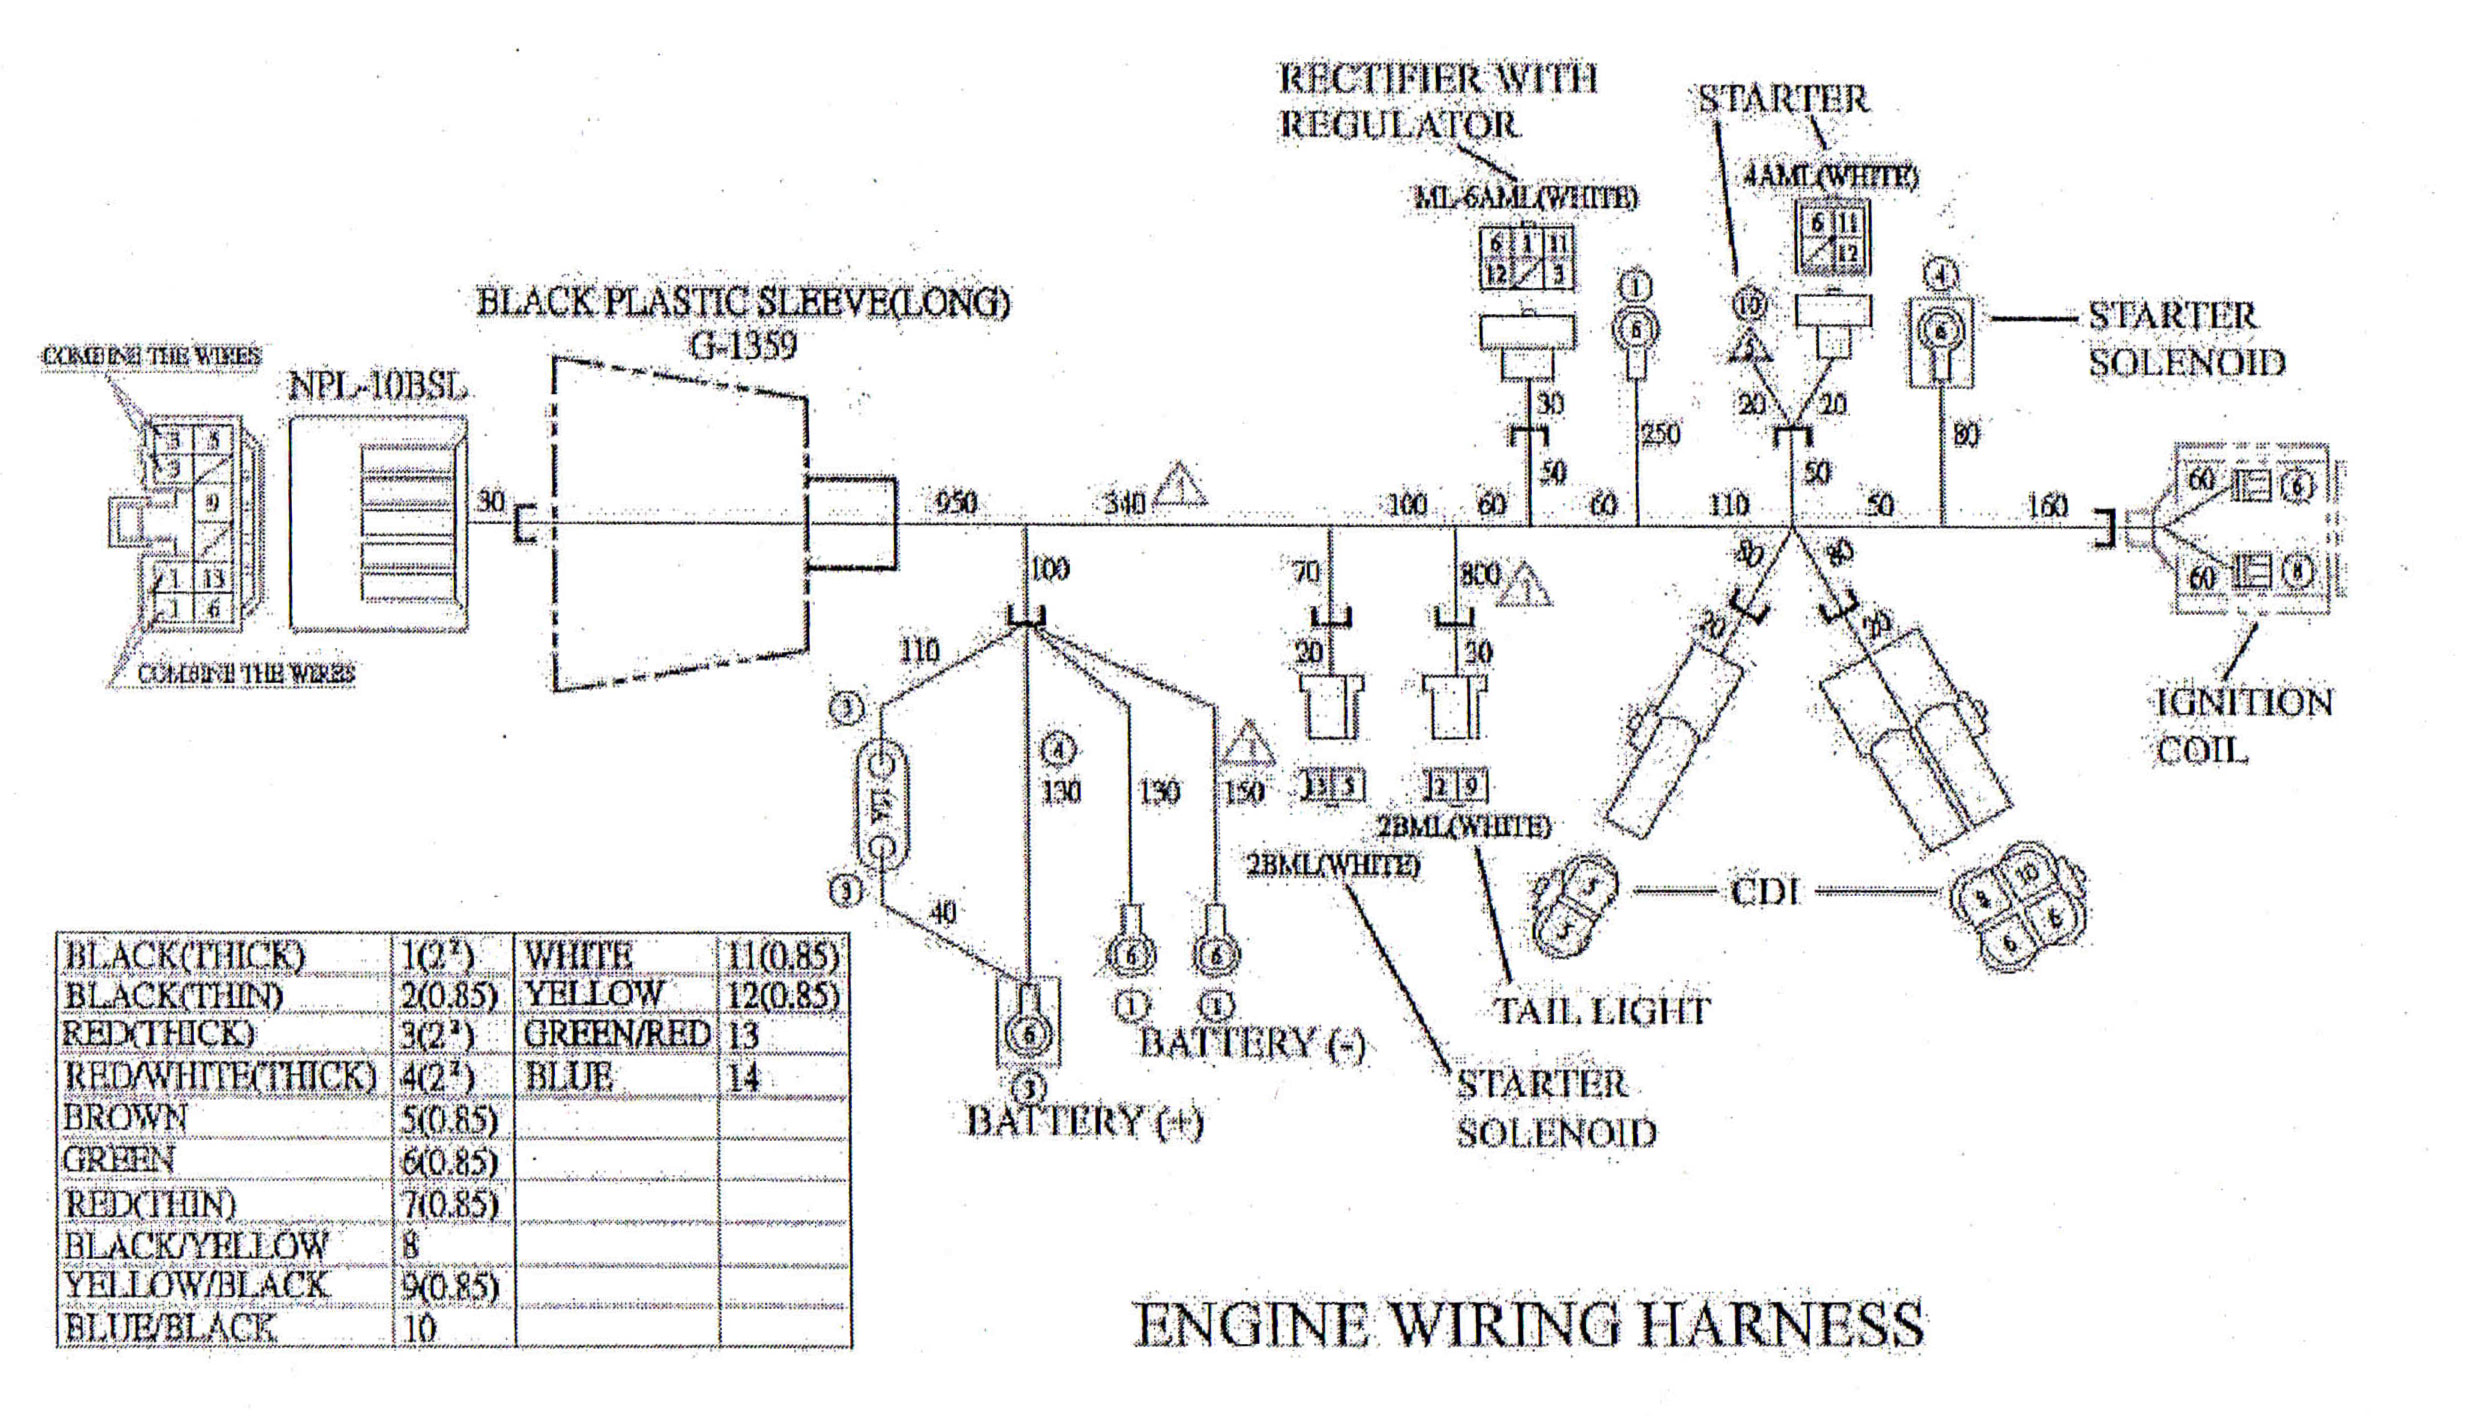 Go Kart Wiring Diagram from wiringall.com